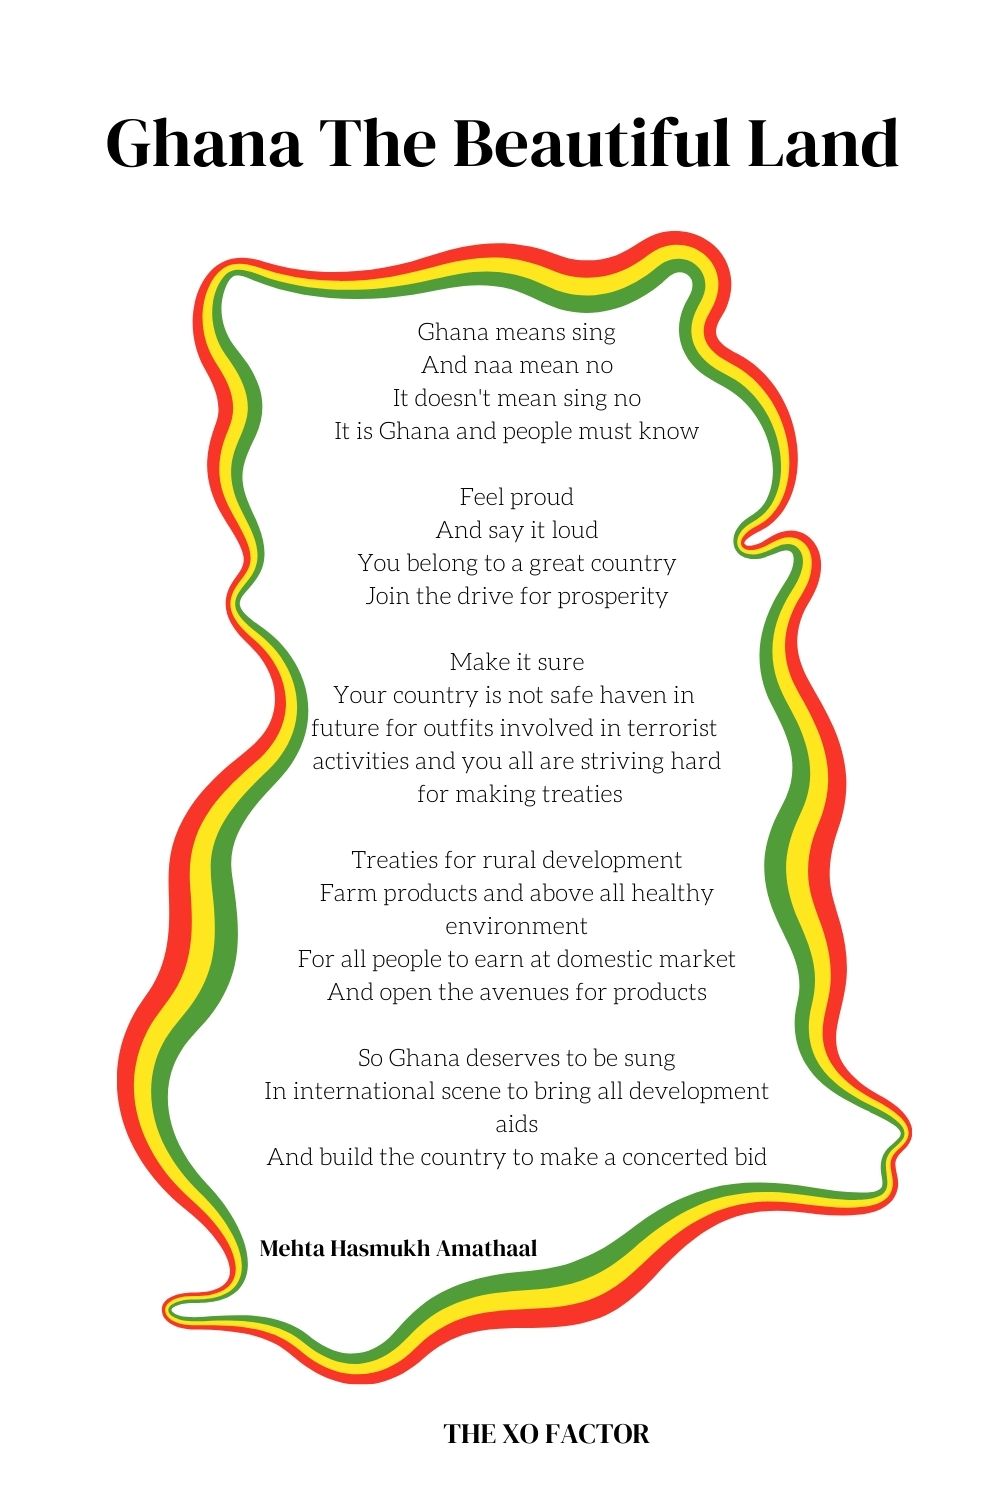 Ghana The Beautiful Land by Mehta Hasmukh Amathaal Poems about Ghana